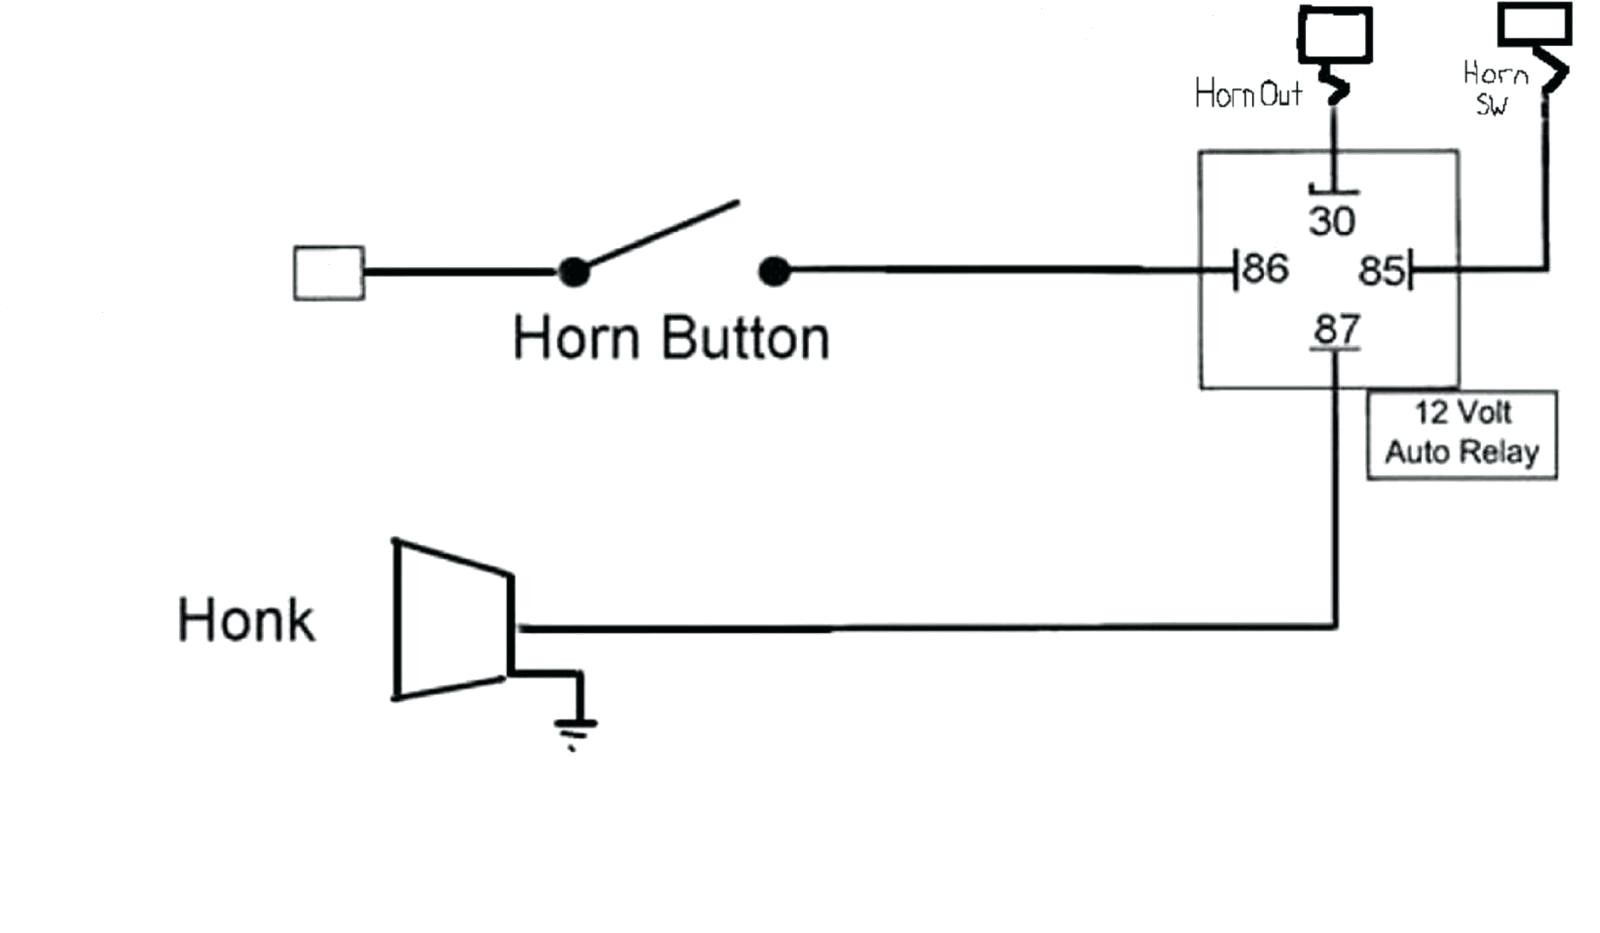 Car Horn Wiring - Wiring Diagram Data - Horn Wiring Diagram With Relay